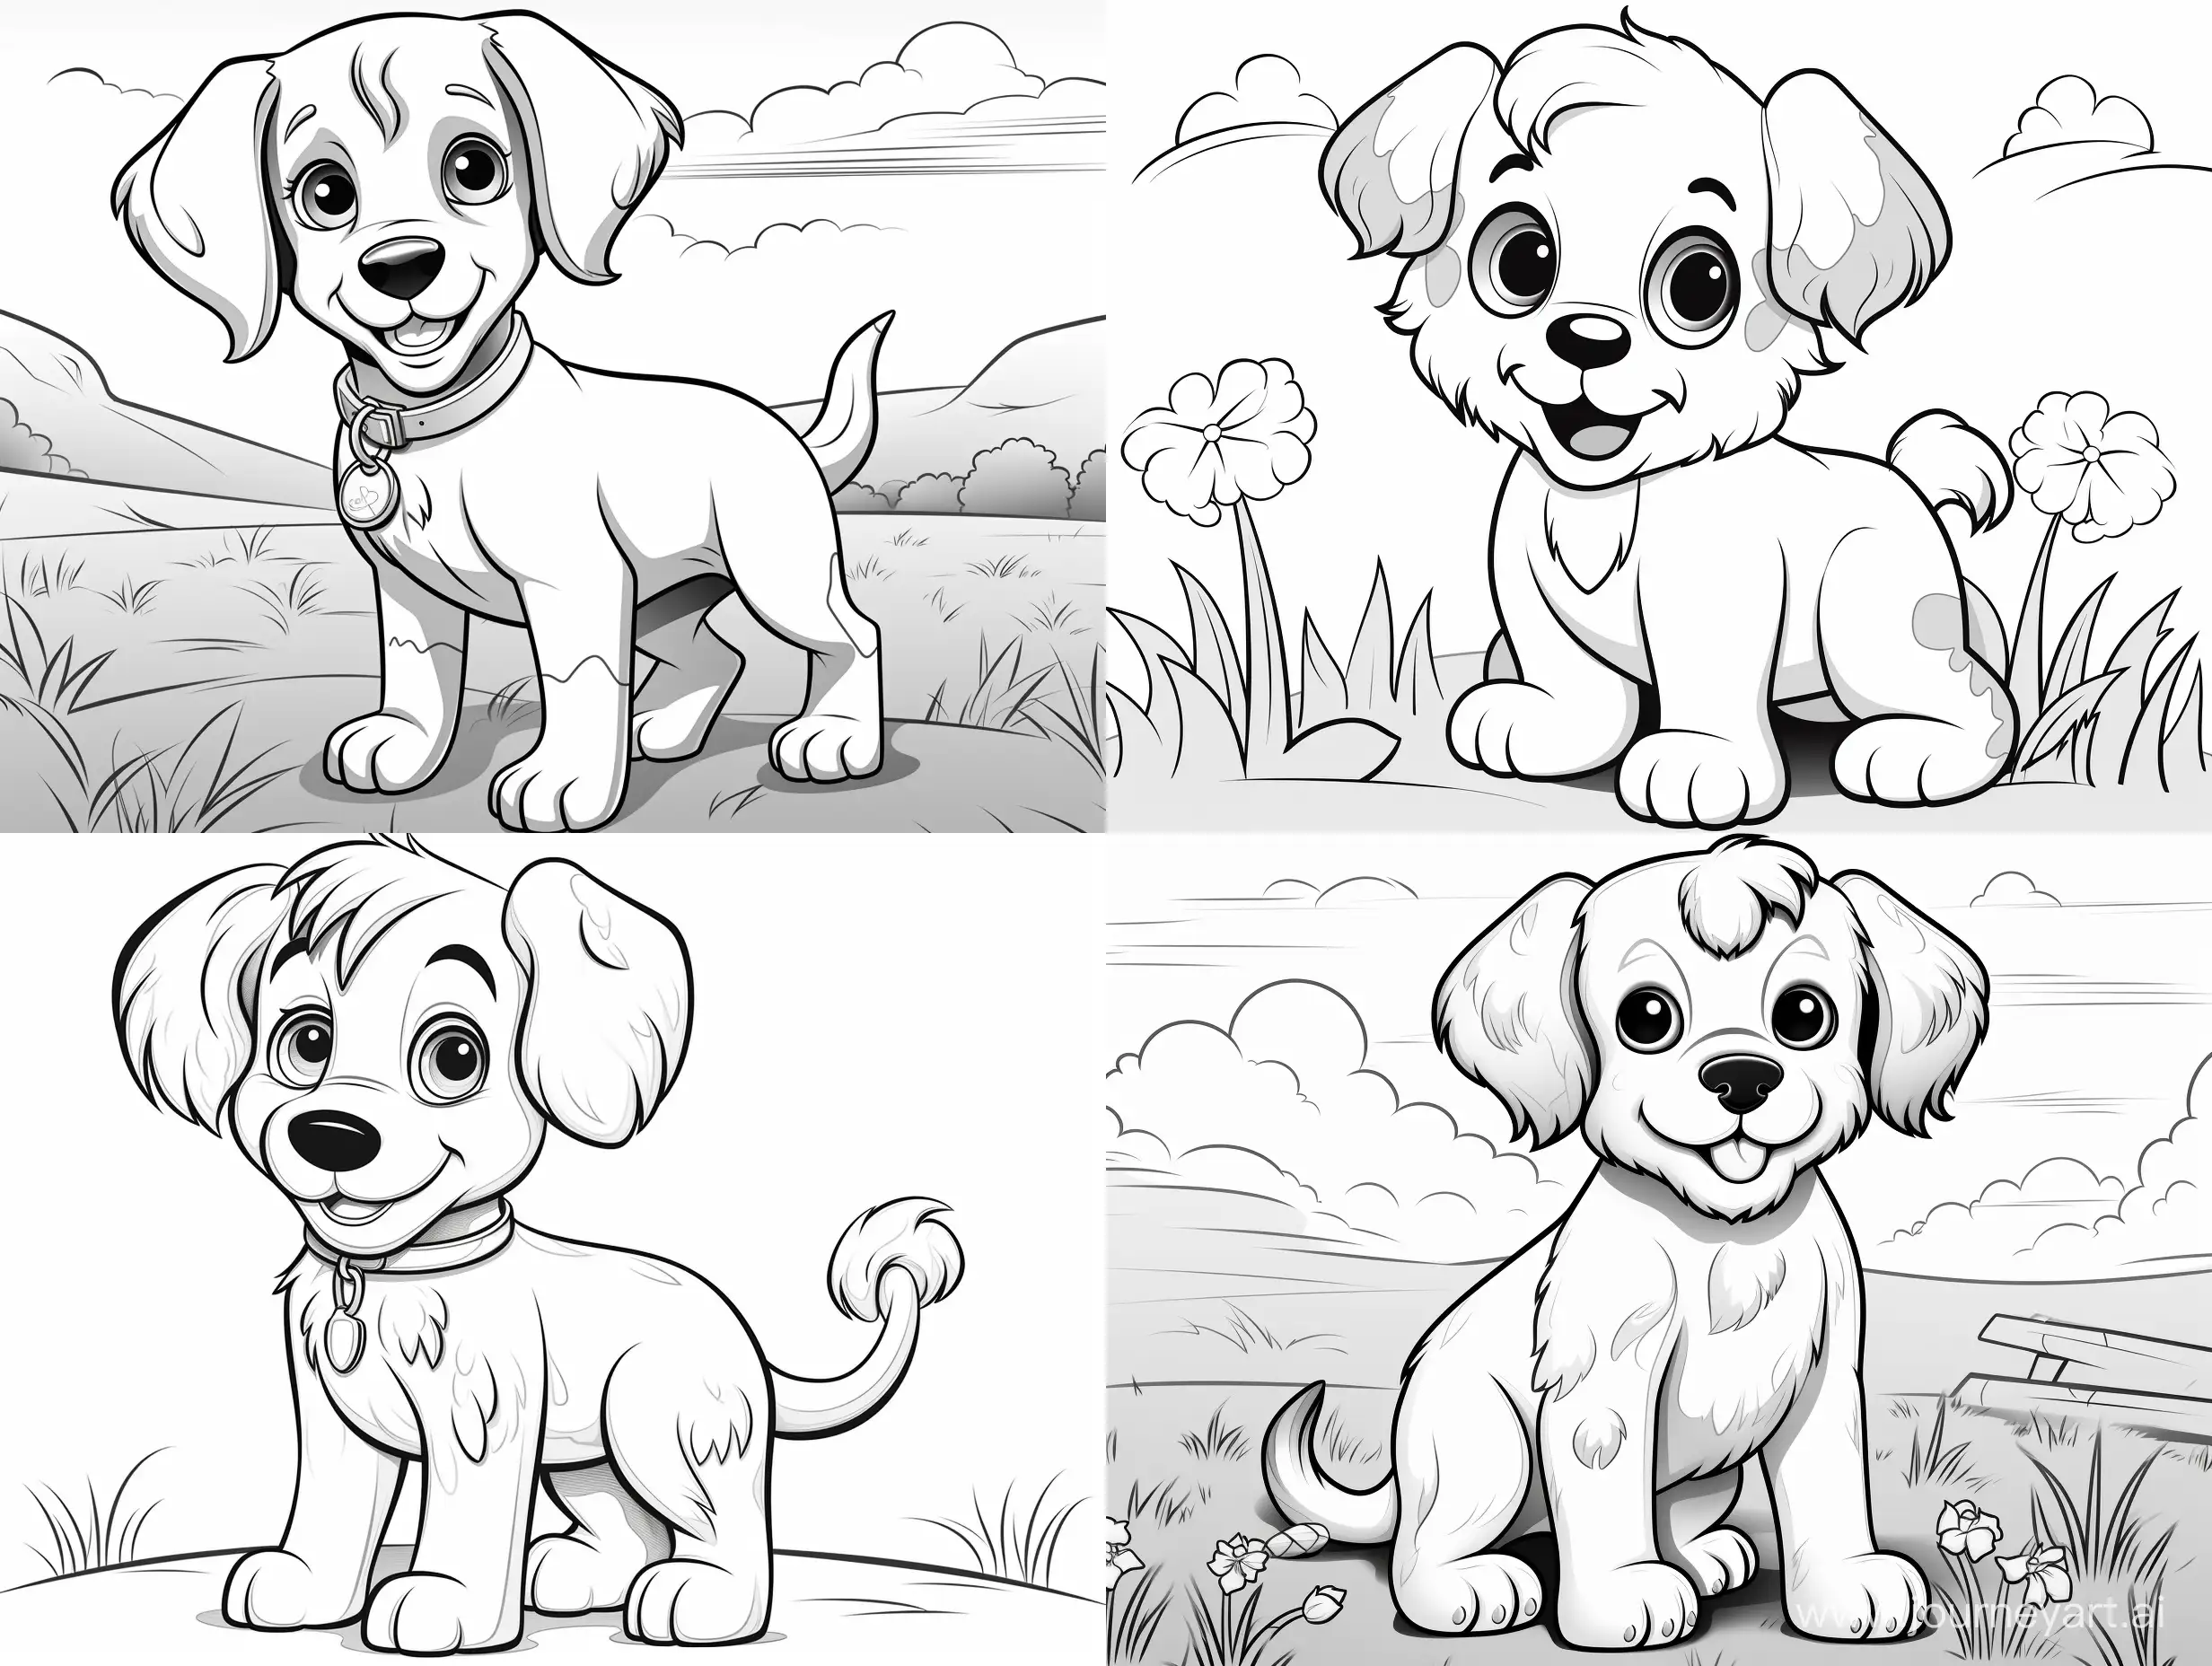 
Black and white contour dog
cartoon for couloring for kids age 1-4 cute